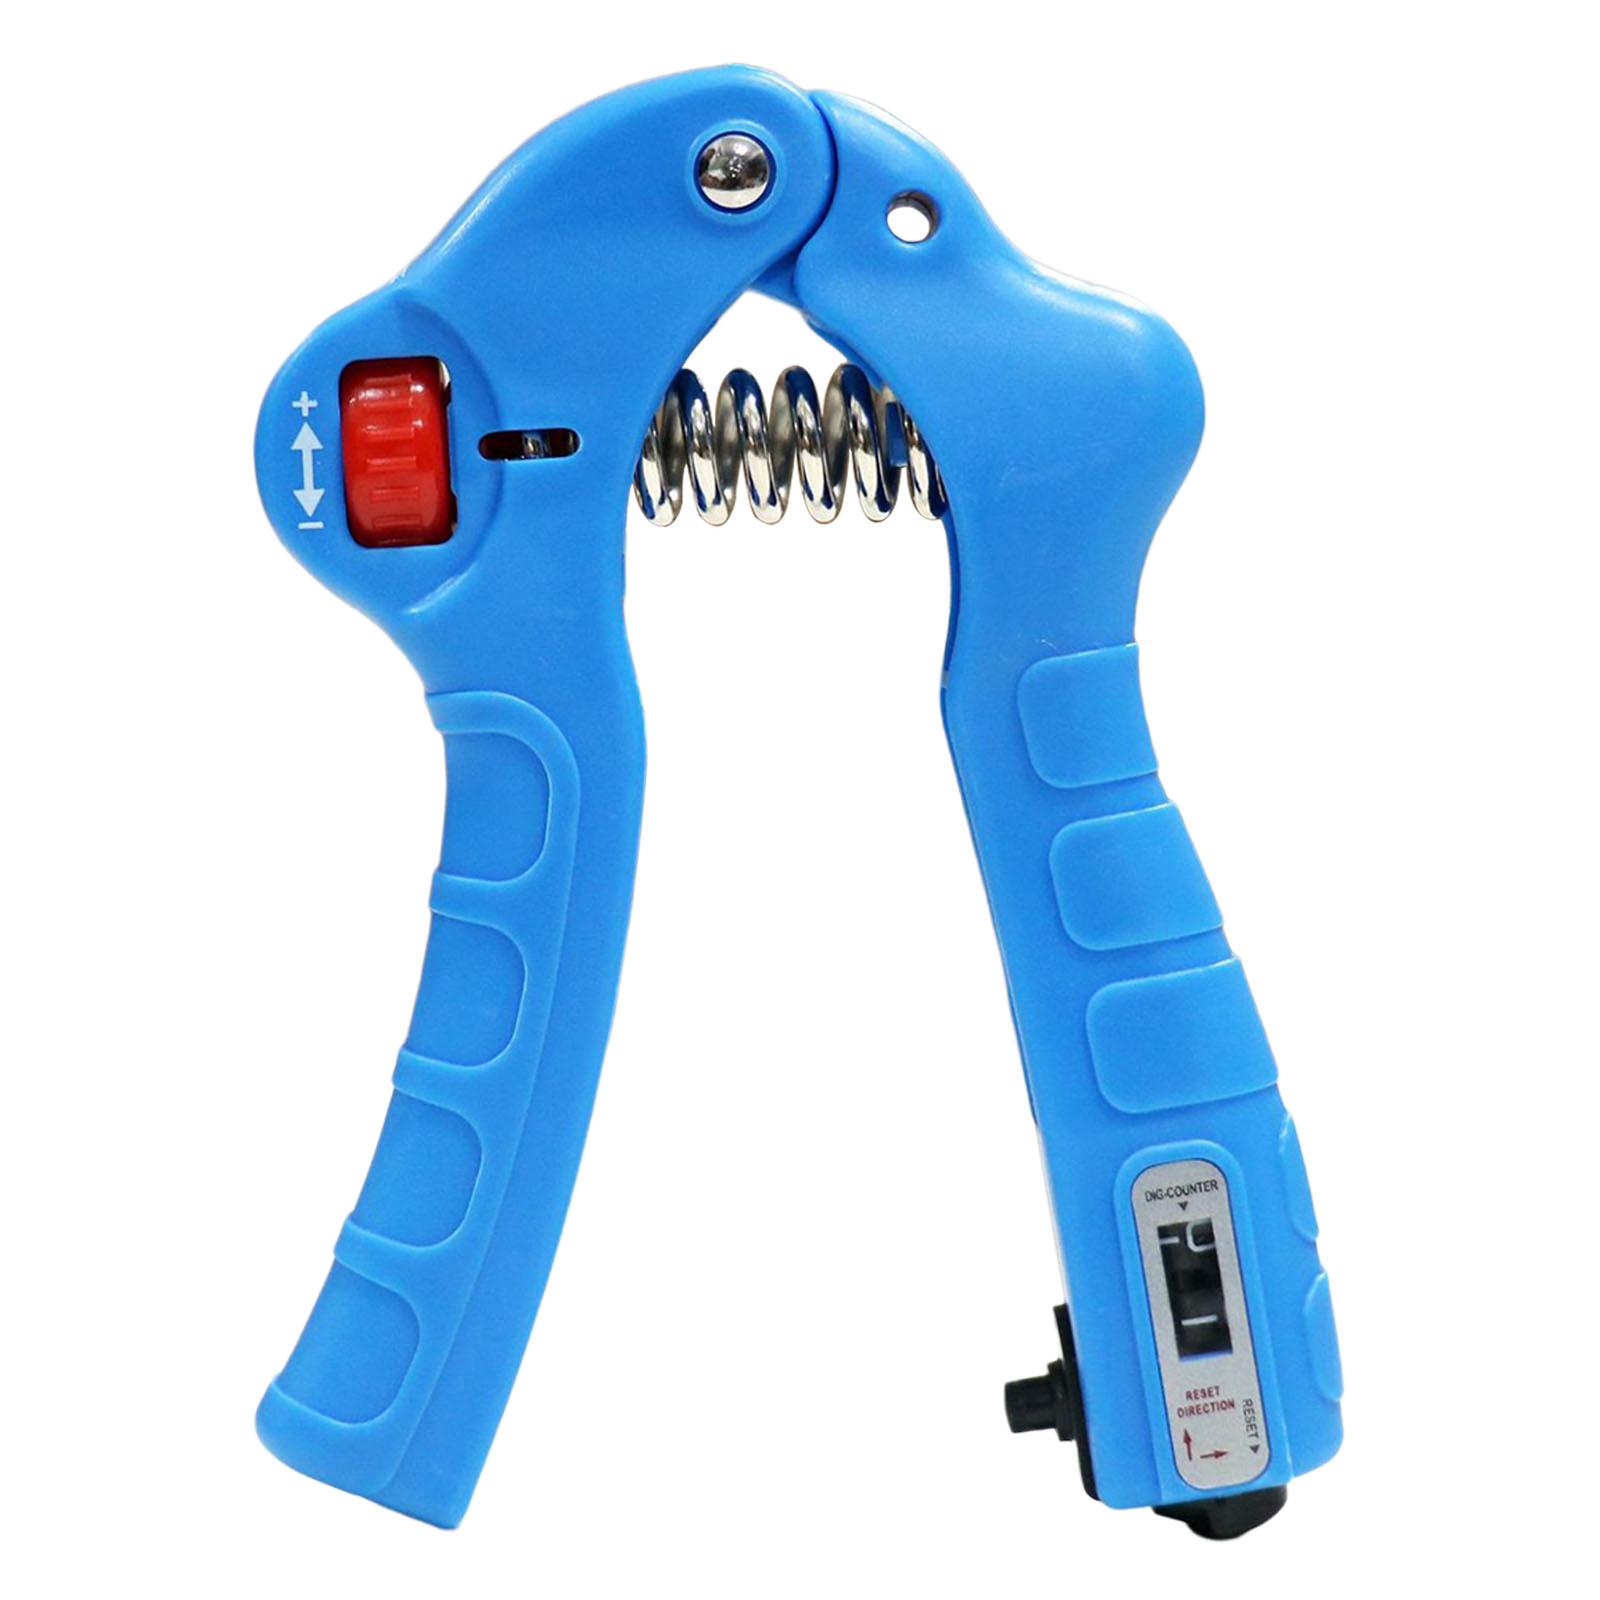 Hand Grip Nonslip Carpal Expander Muscle Training Fitness Equipment blue